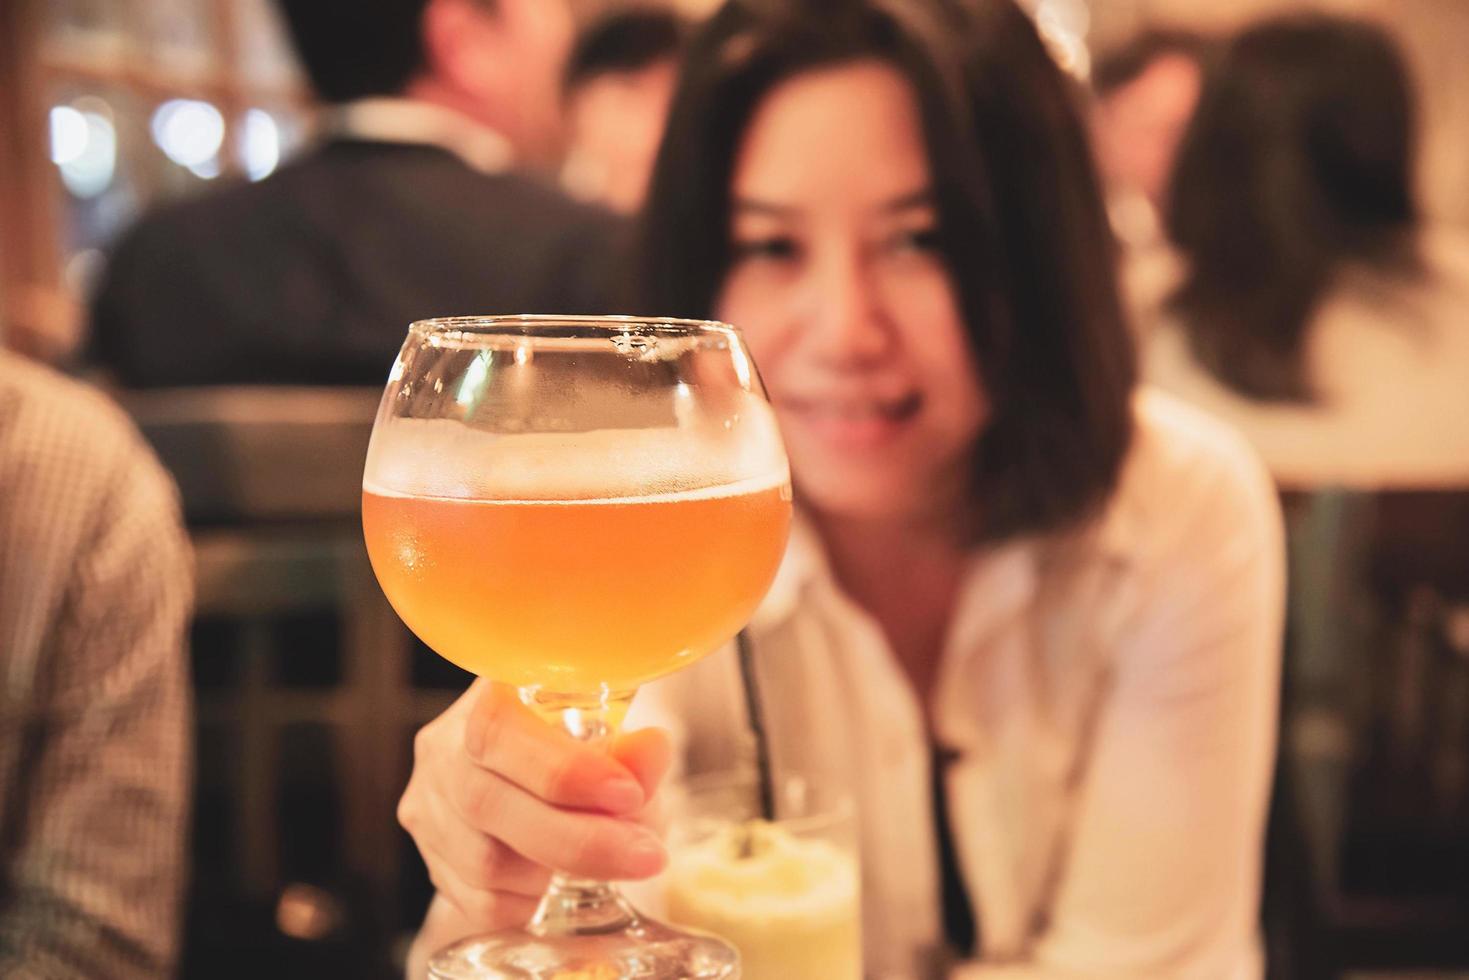 Happy lady shows a big glass of beer in restaurant - celebration beer cheers concept photo